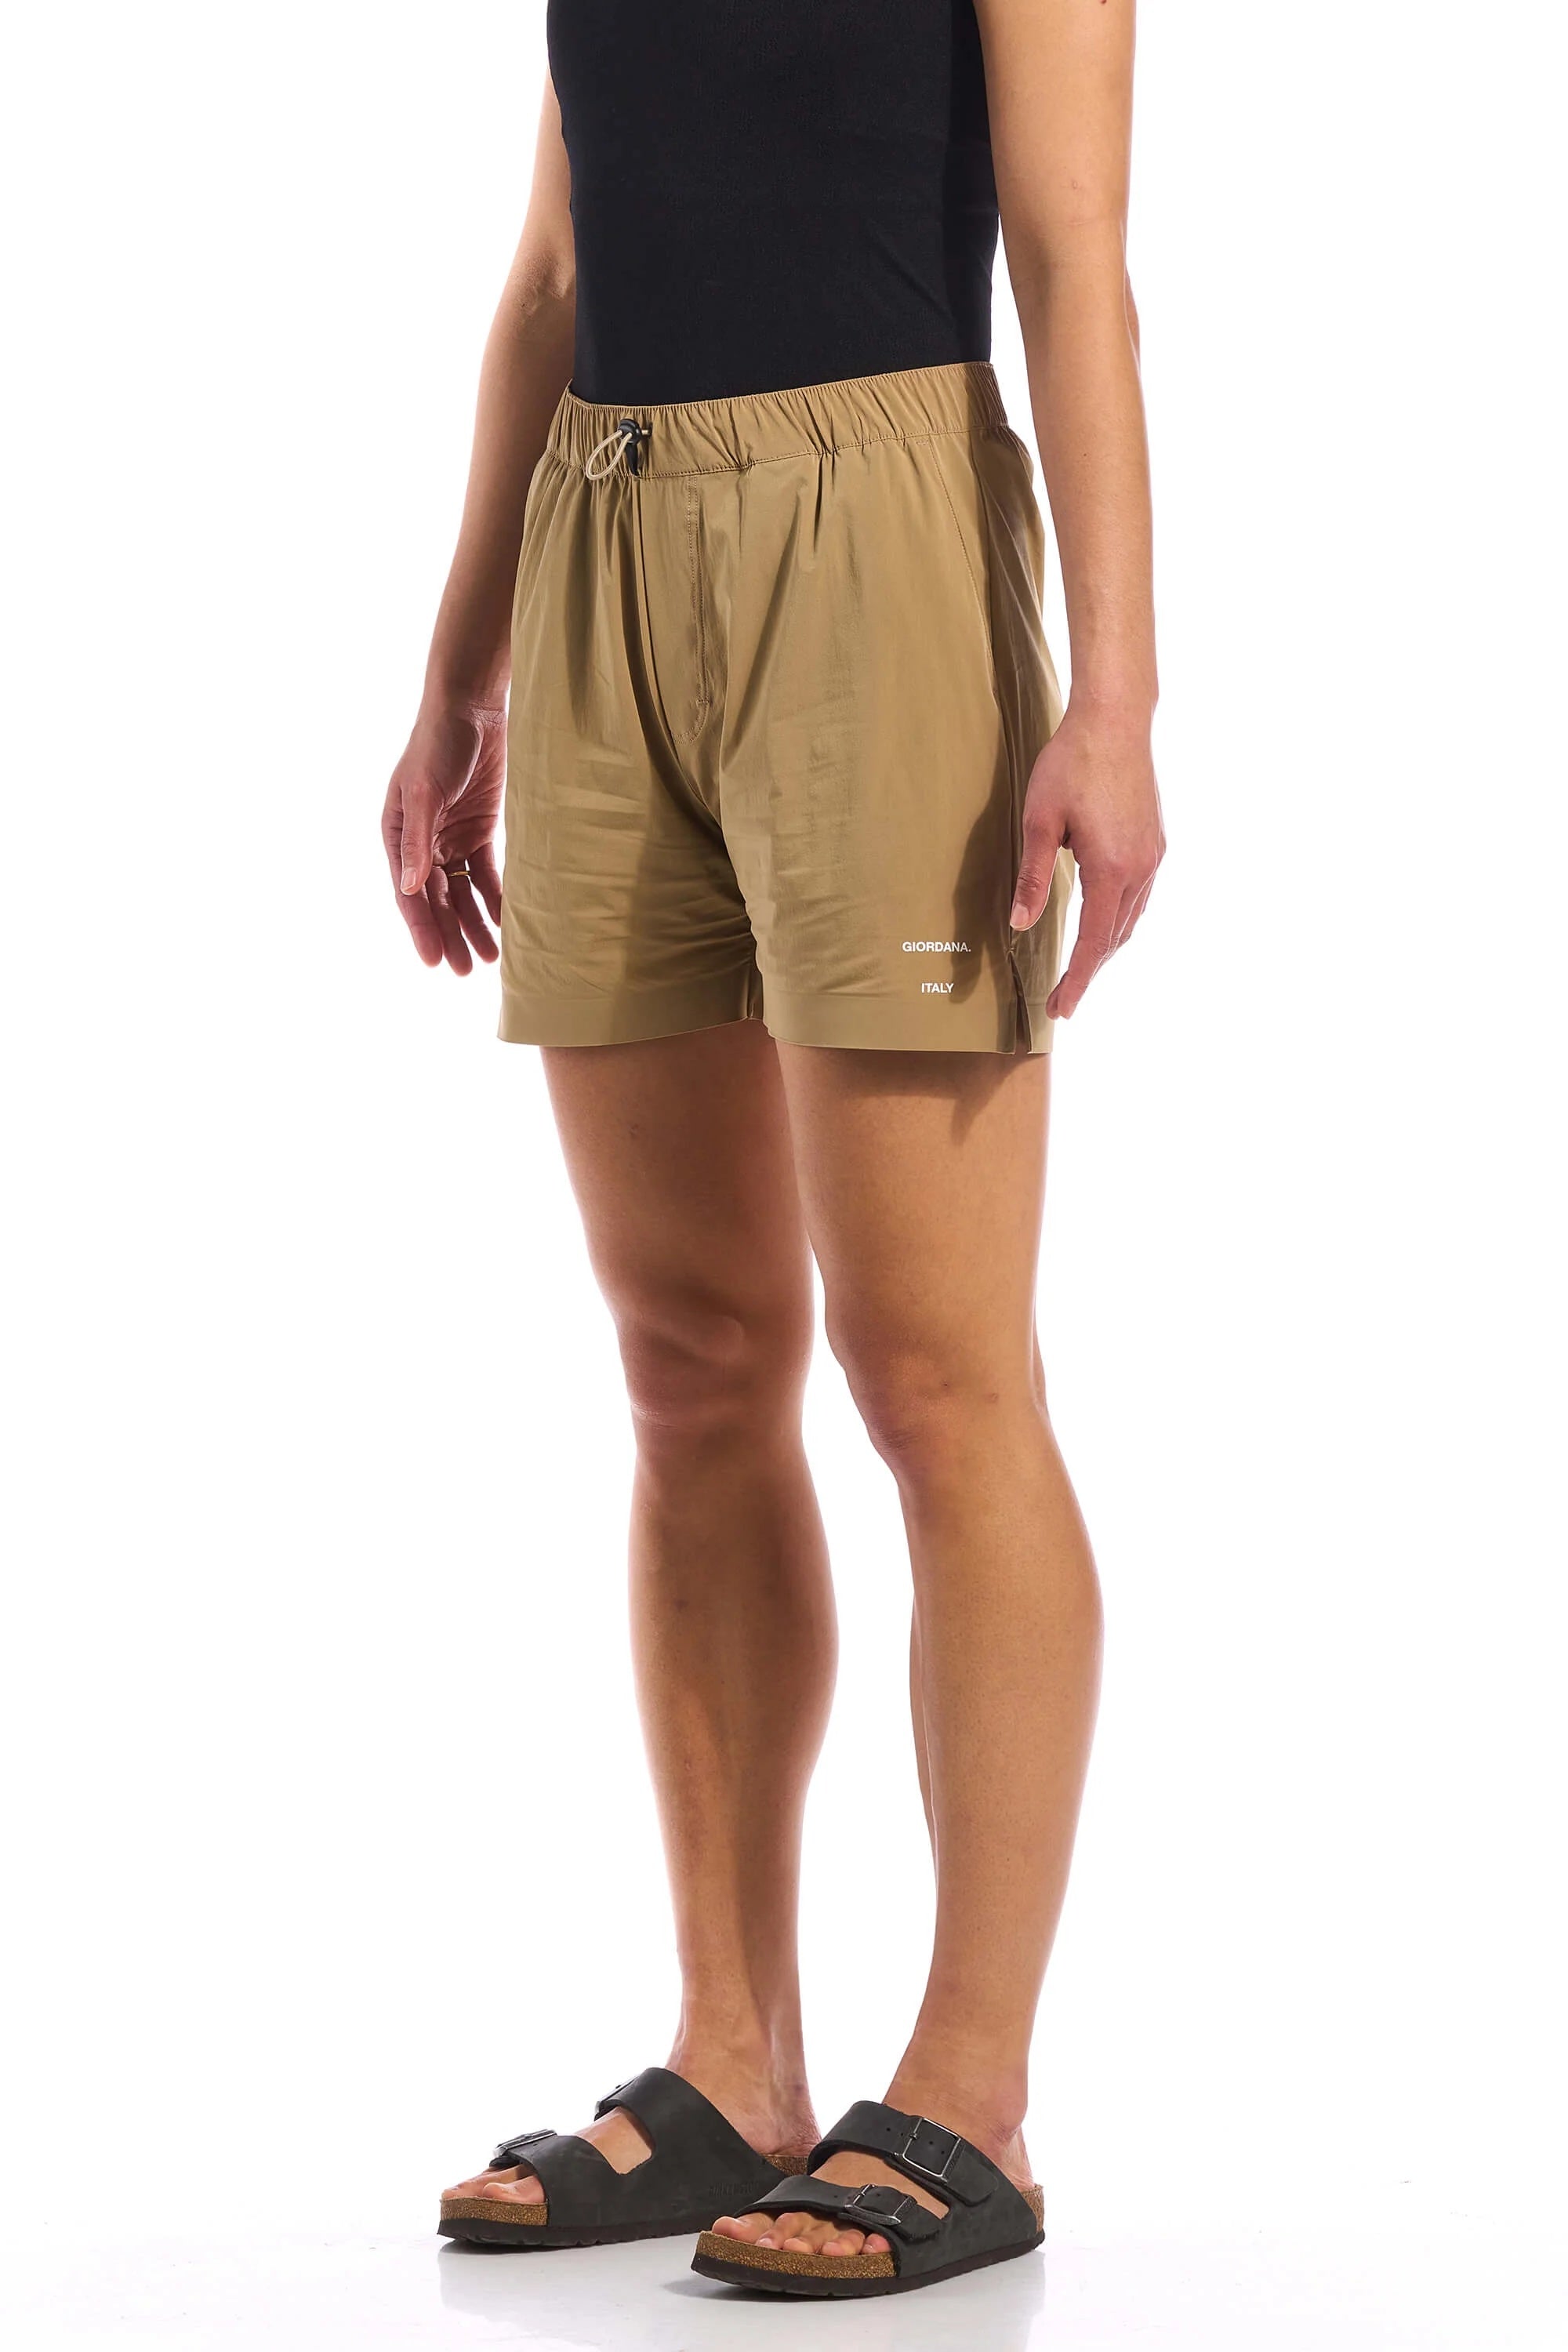 The Active Shorts 6.5"